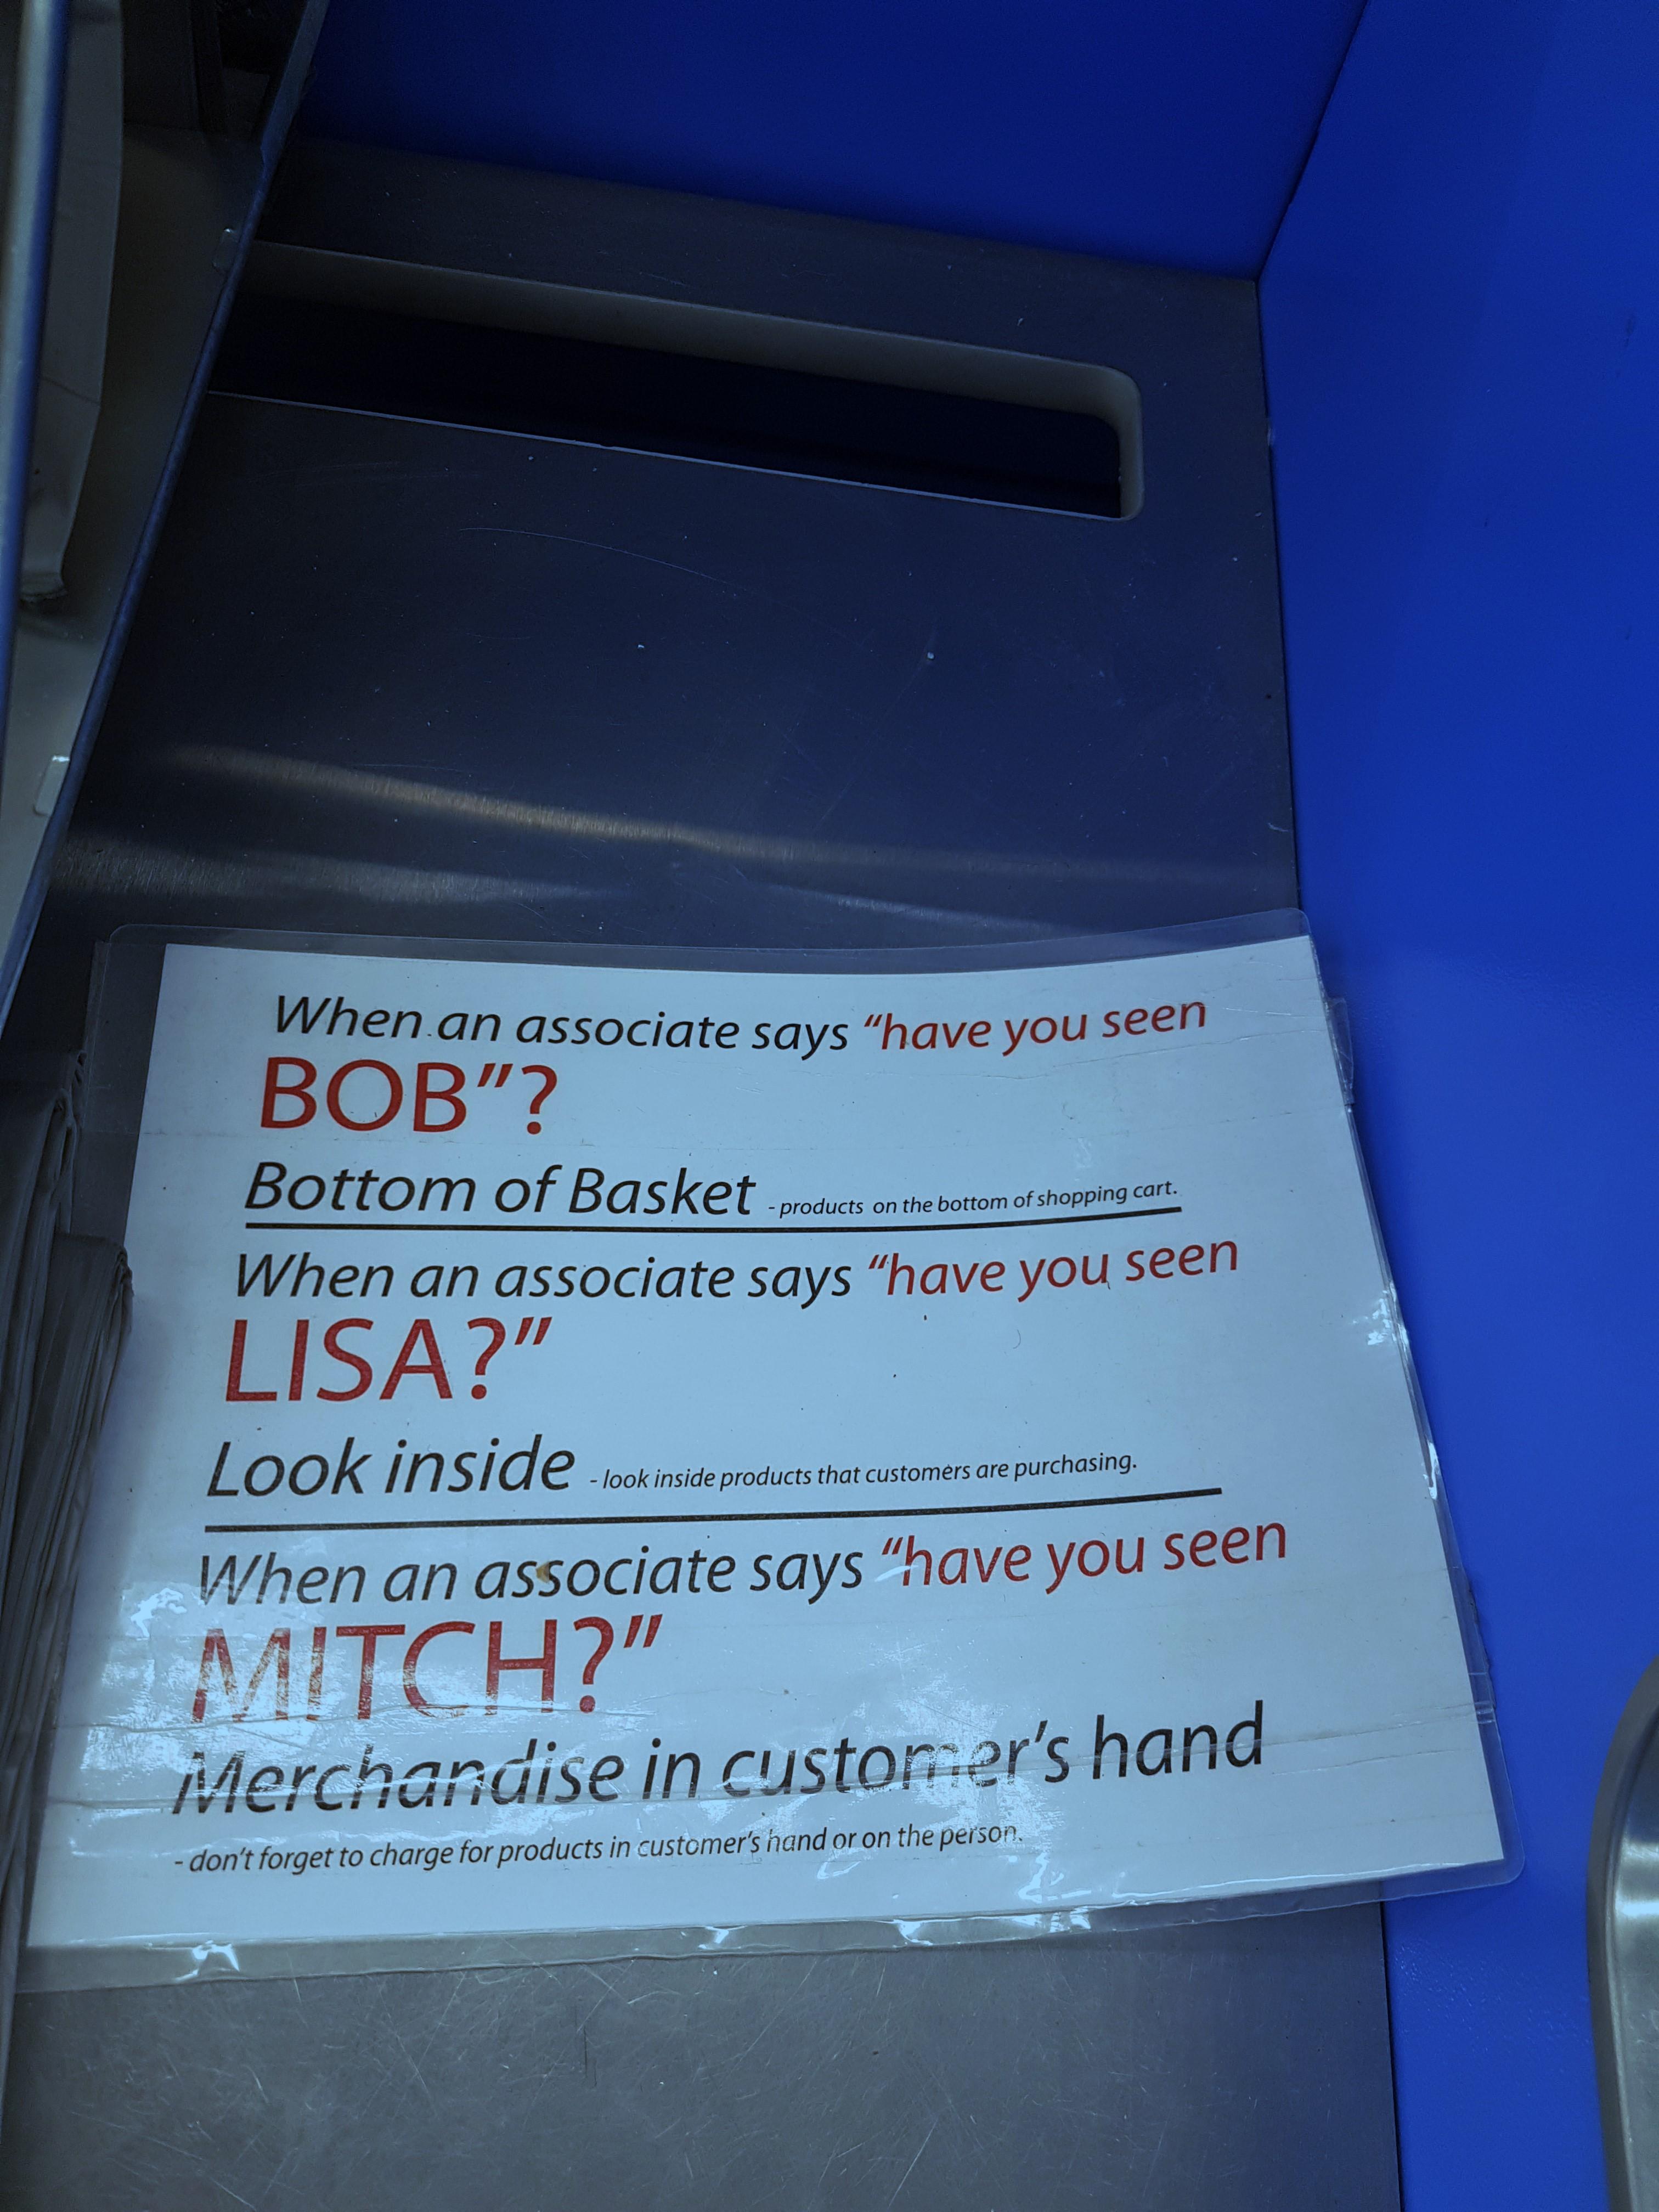 walmart secret codes - When an associate says "have you seen Bob"? Bottom of Basket When an associate says "have you seen Lisa?" Look inside When an associate says "have you seen Mitch?" viderchandise in customer's hand o free to charge for product